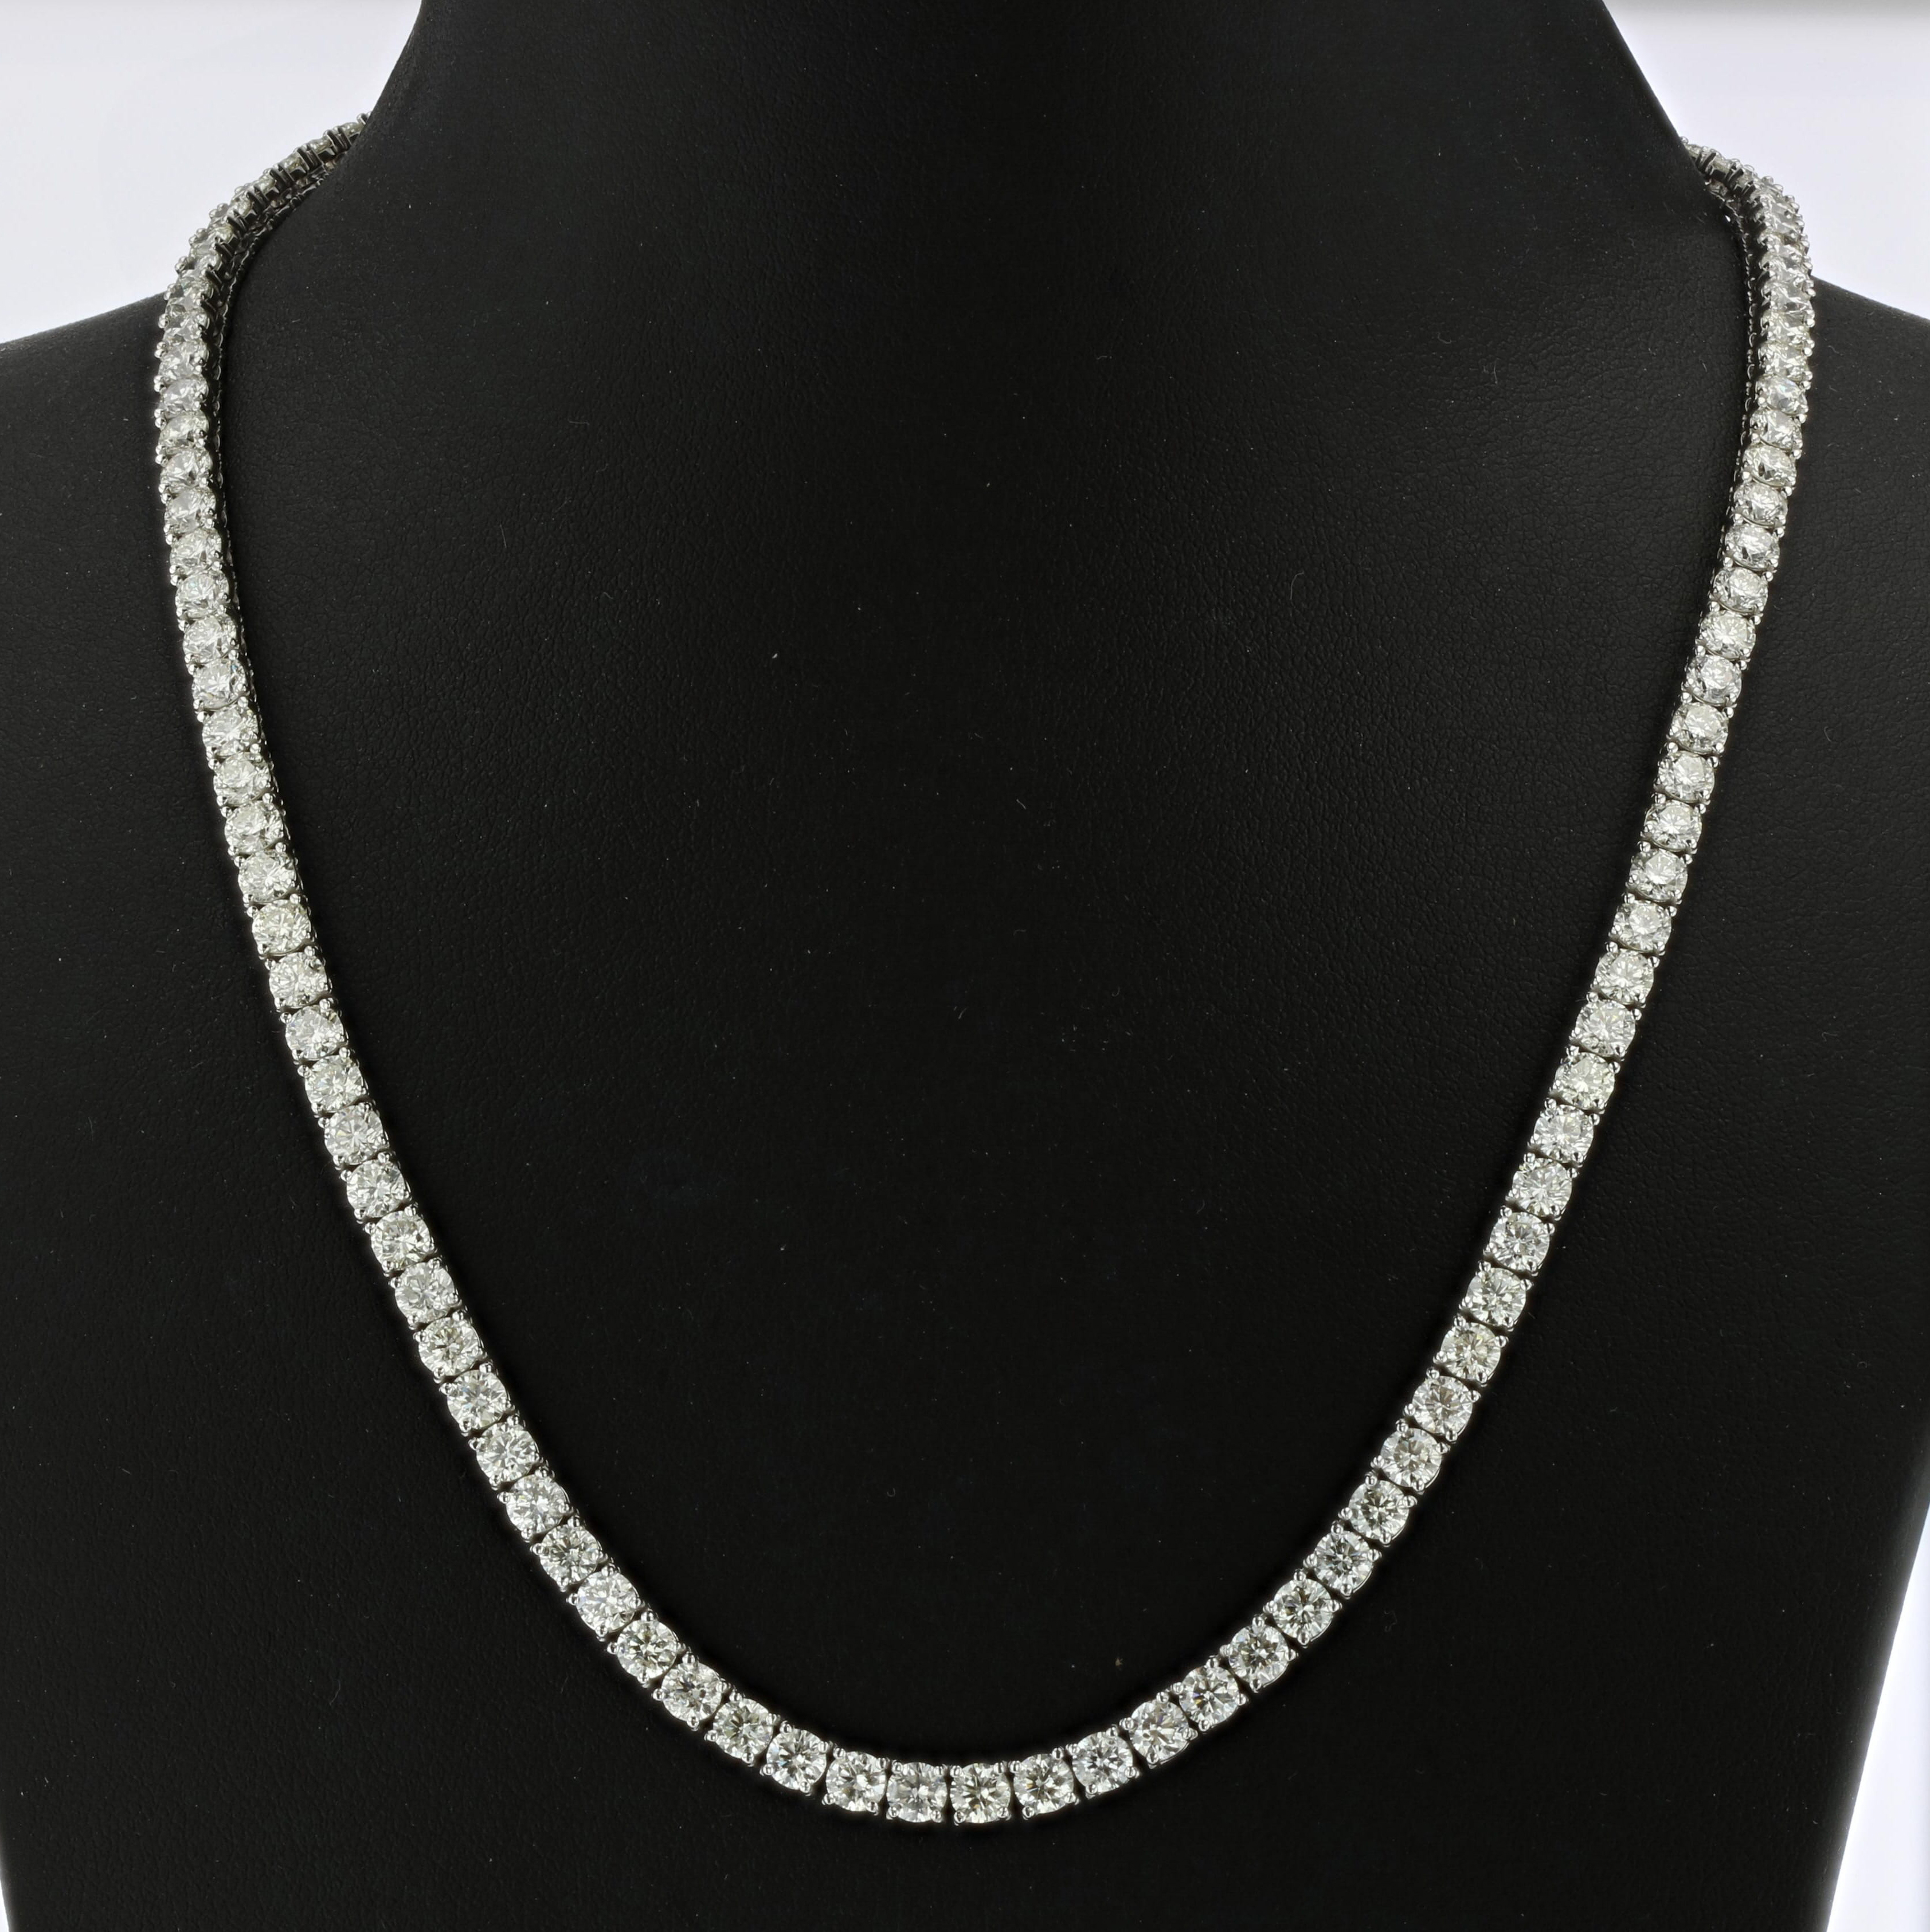 View 20ctw Diamond Straight Size Tennis Necklace in 14k White Gold 17 inch